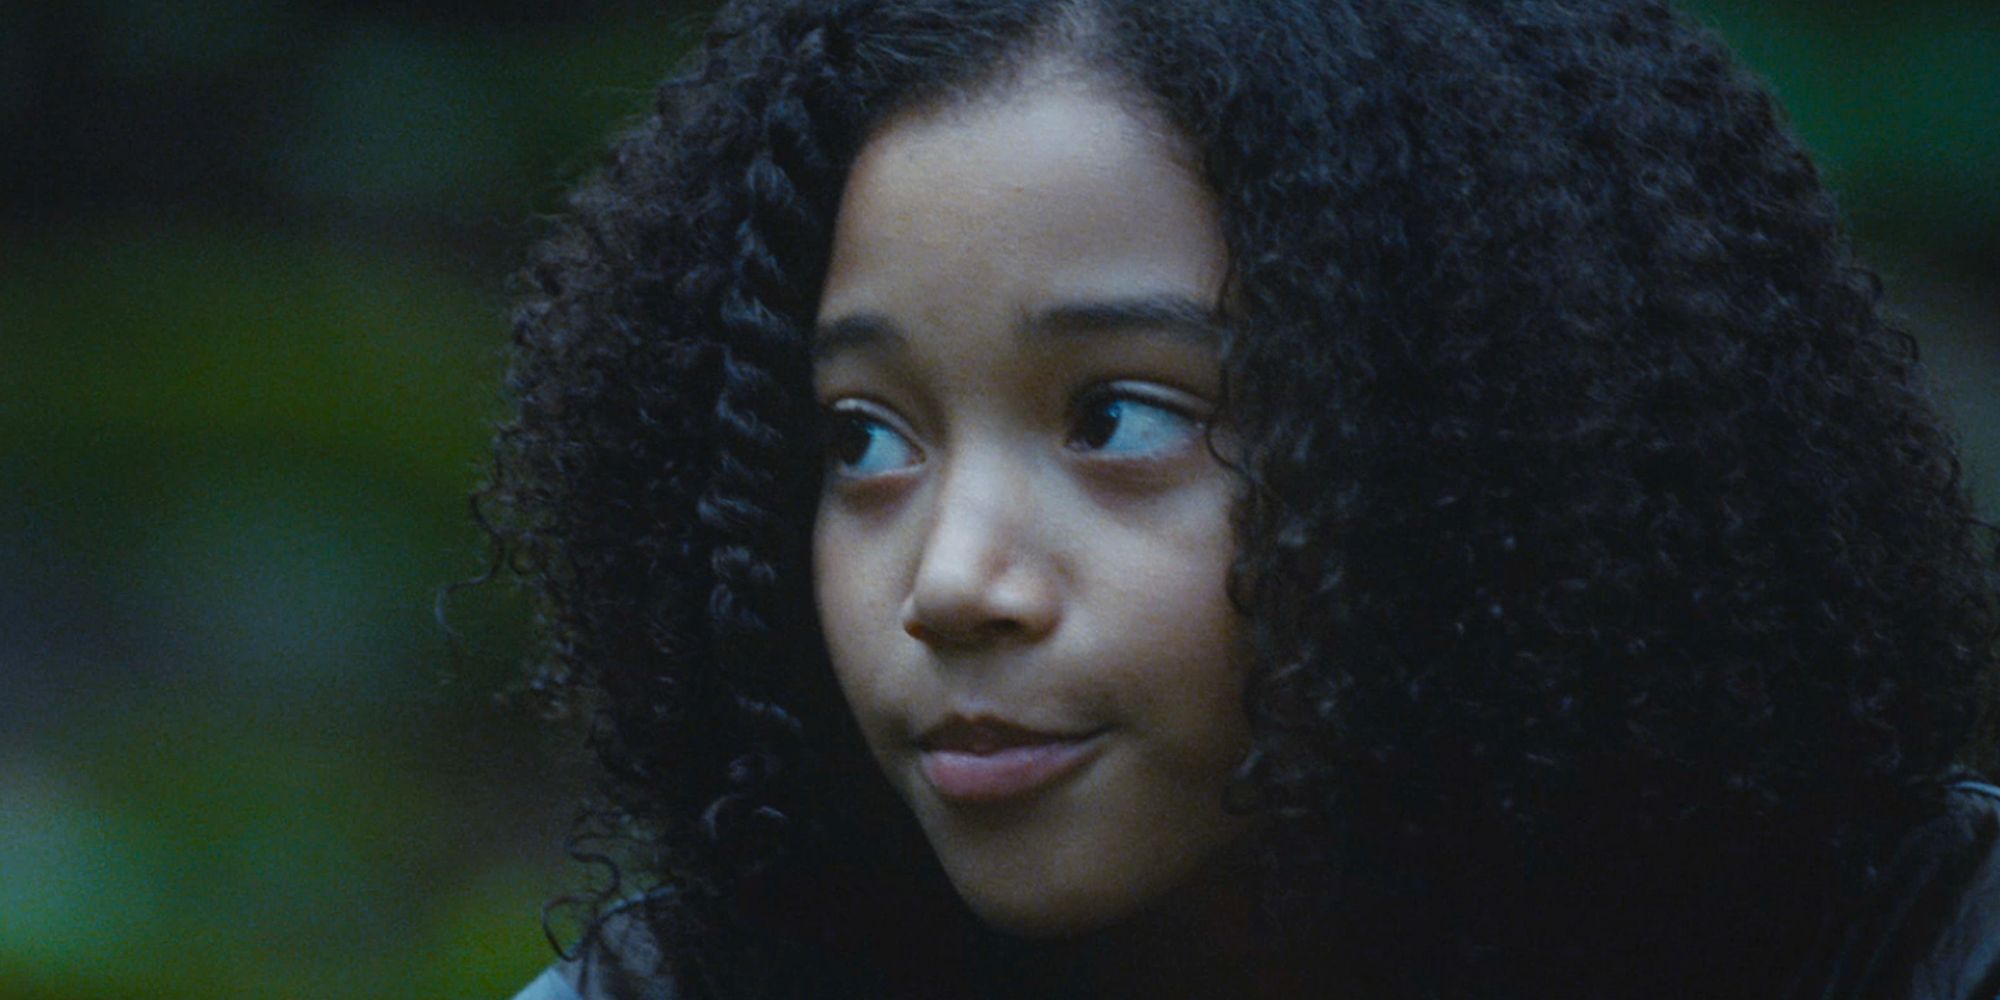 Amandla Stenberg as Rue in The Hunger Games